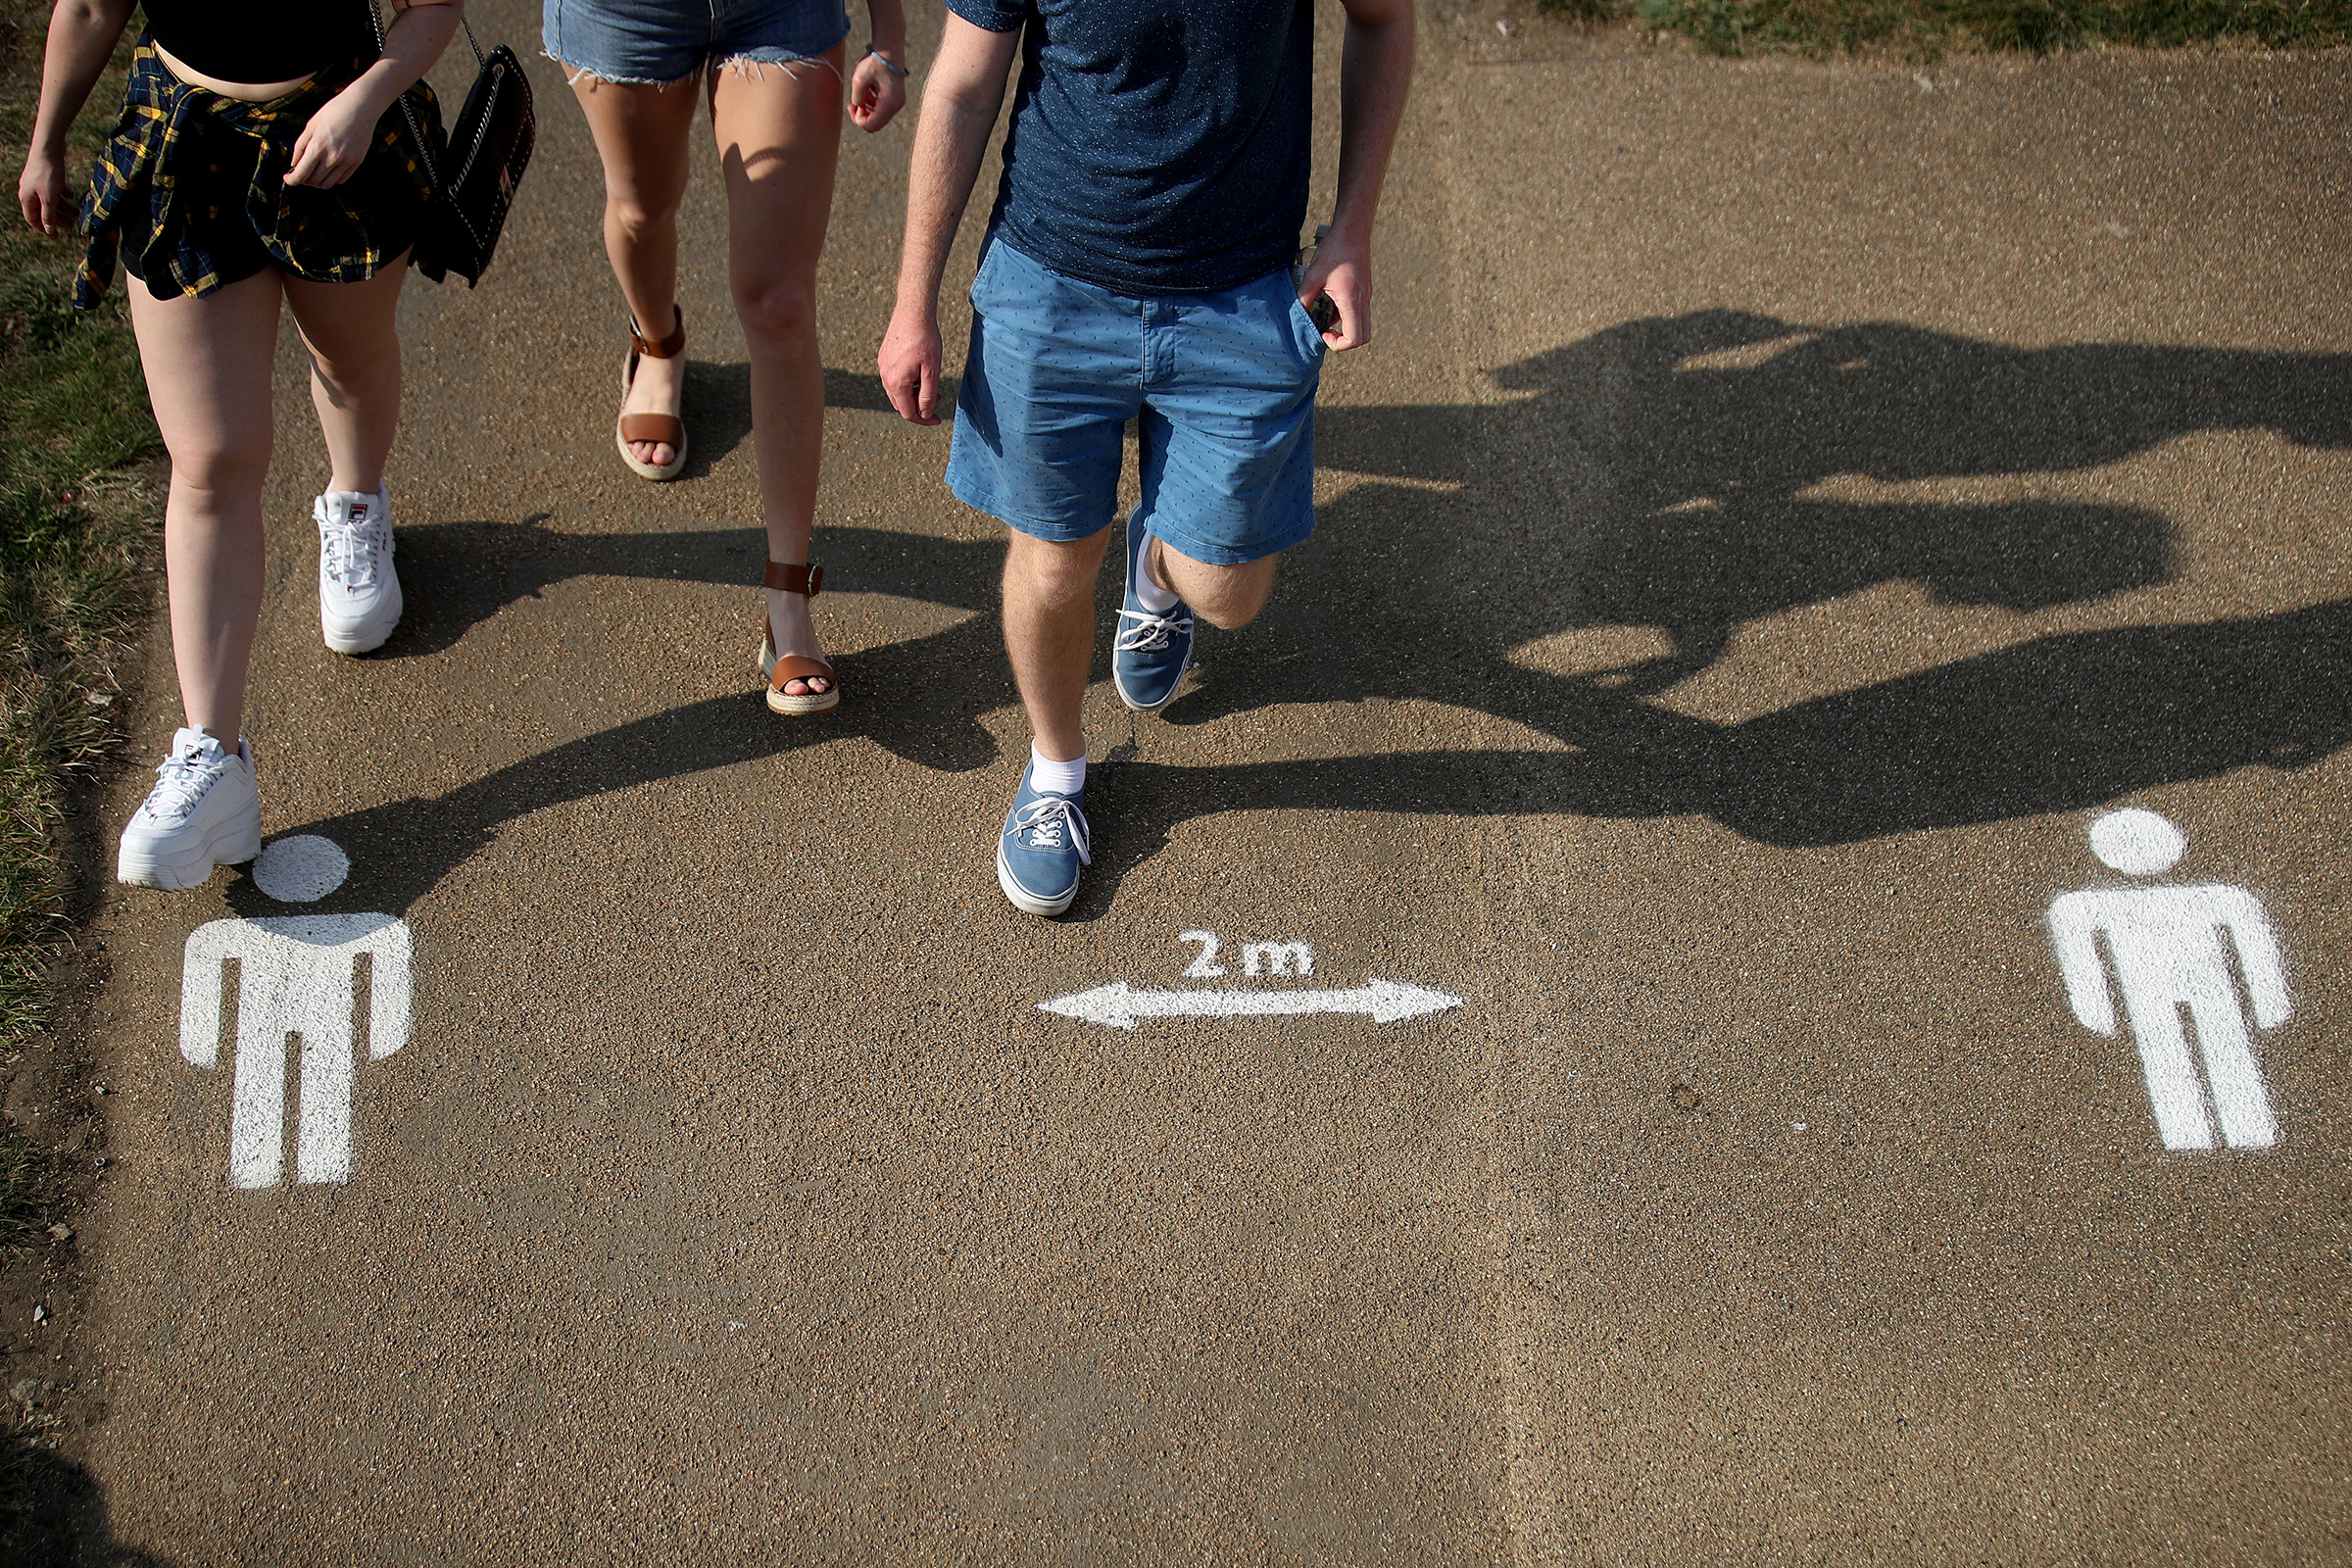 People walk past the social distancing markings on the ground at Queen Elizabeth Olympic Park in London, England on April 11, 2020. (Alex Pantling—Getty Images)